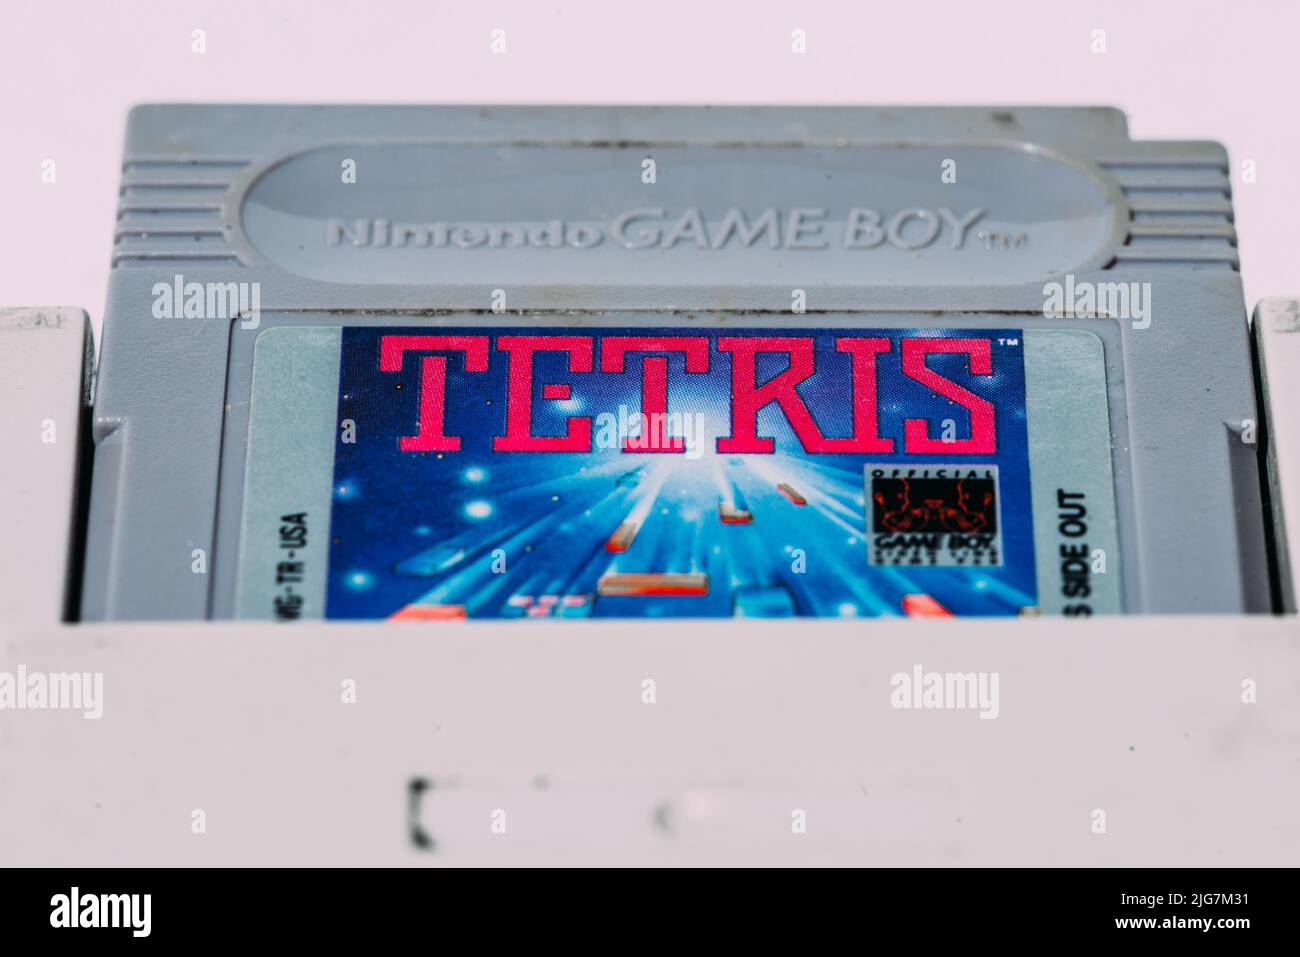 Game Boy is an 8-bit handheld game console developed and manufactured by Nintendo first released in 1989 - close up of Tetris cartridge Stock Photo